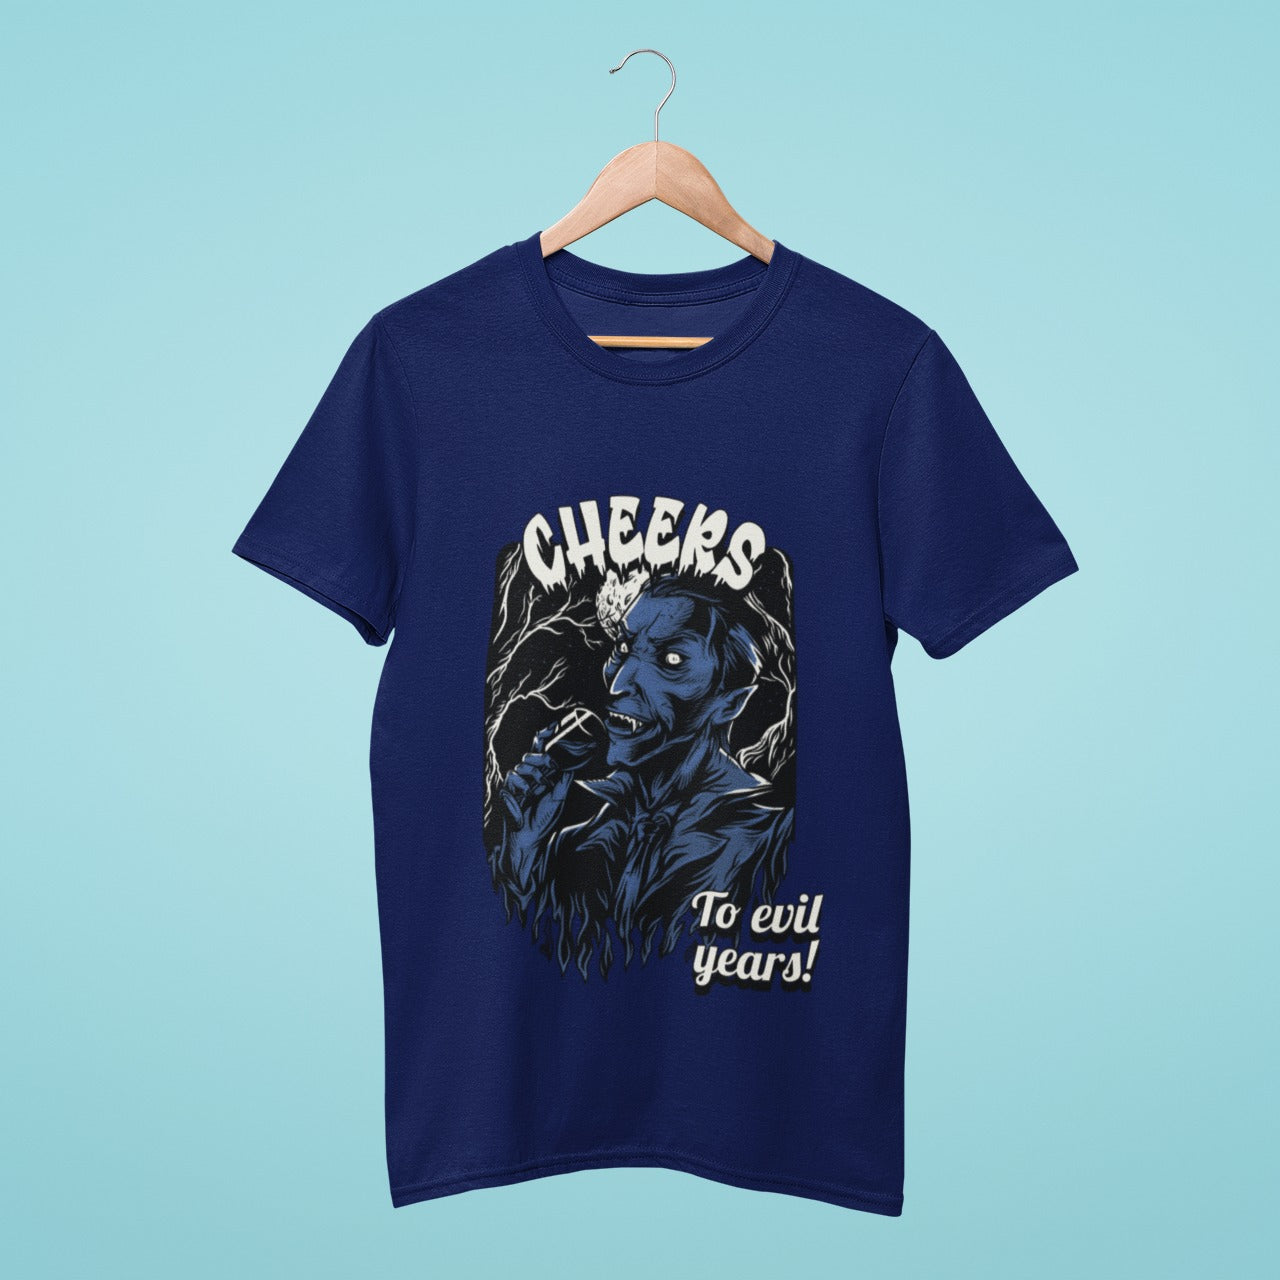 Raise your glass to the wicked with our navy blue t-shirt featuring the "Cheers to Evil Years" slogan and a graphic of a stylish vampire indulging in a sip from his wine glass. Perfect for Halloween or any gothic occasion, this tee is a must-have for all those who love to embrace their darker side. Get yours now and toast to the spooky season in style!